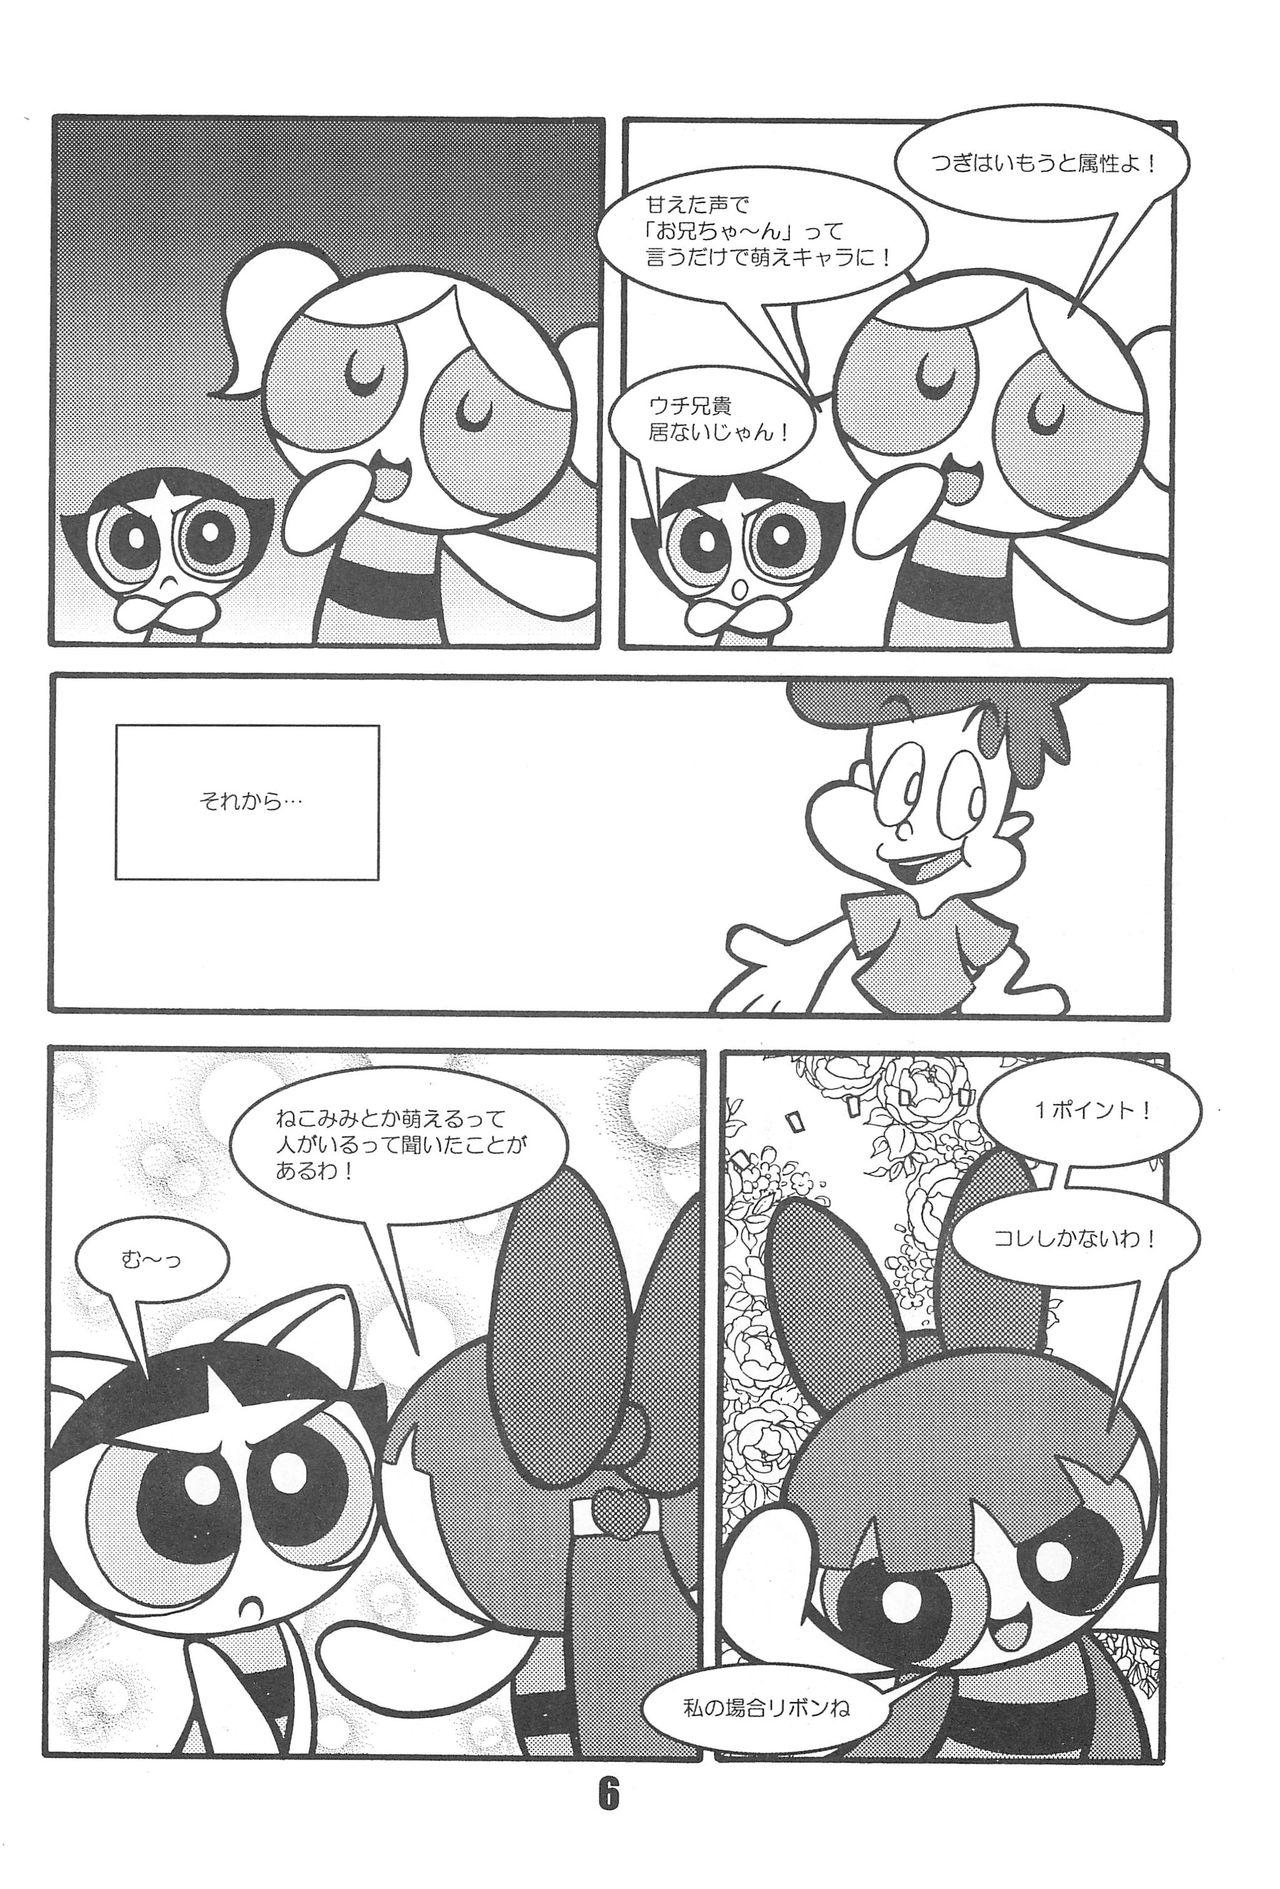 Blowjobs Show Goes On! Funhouse 22th - The powerpuff girls Round Ass - Page 6